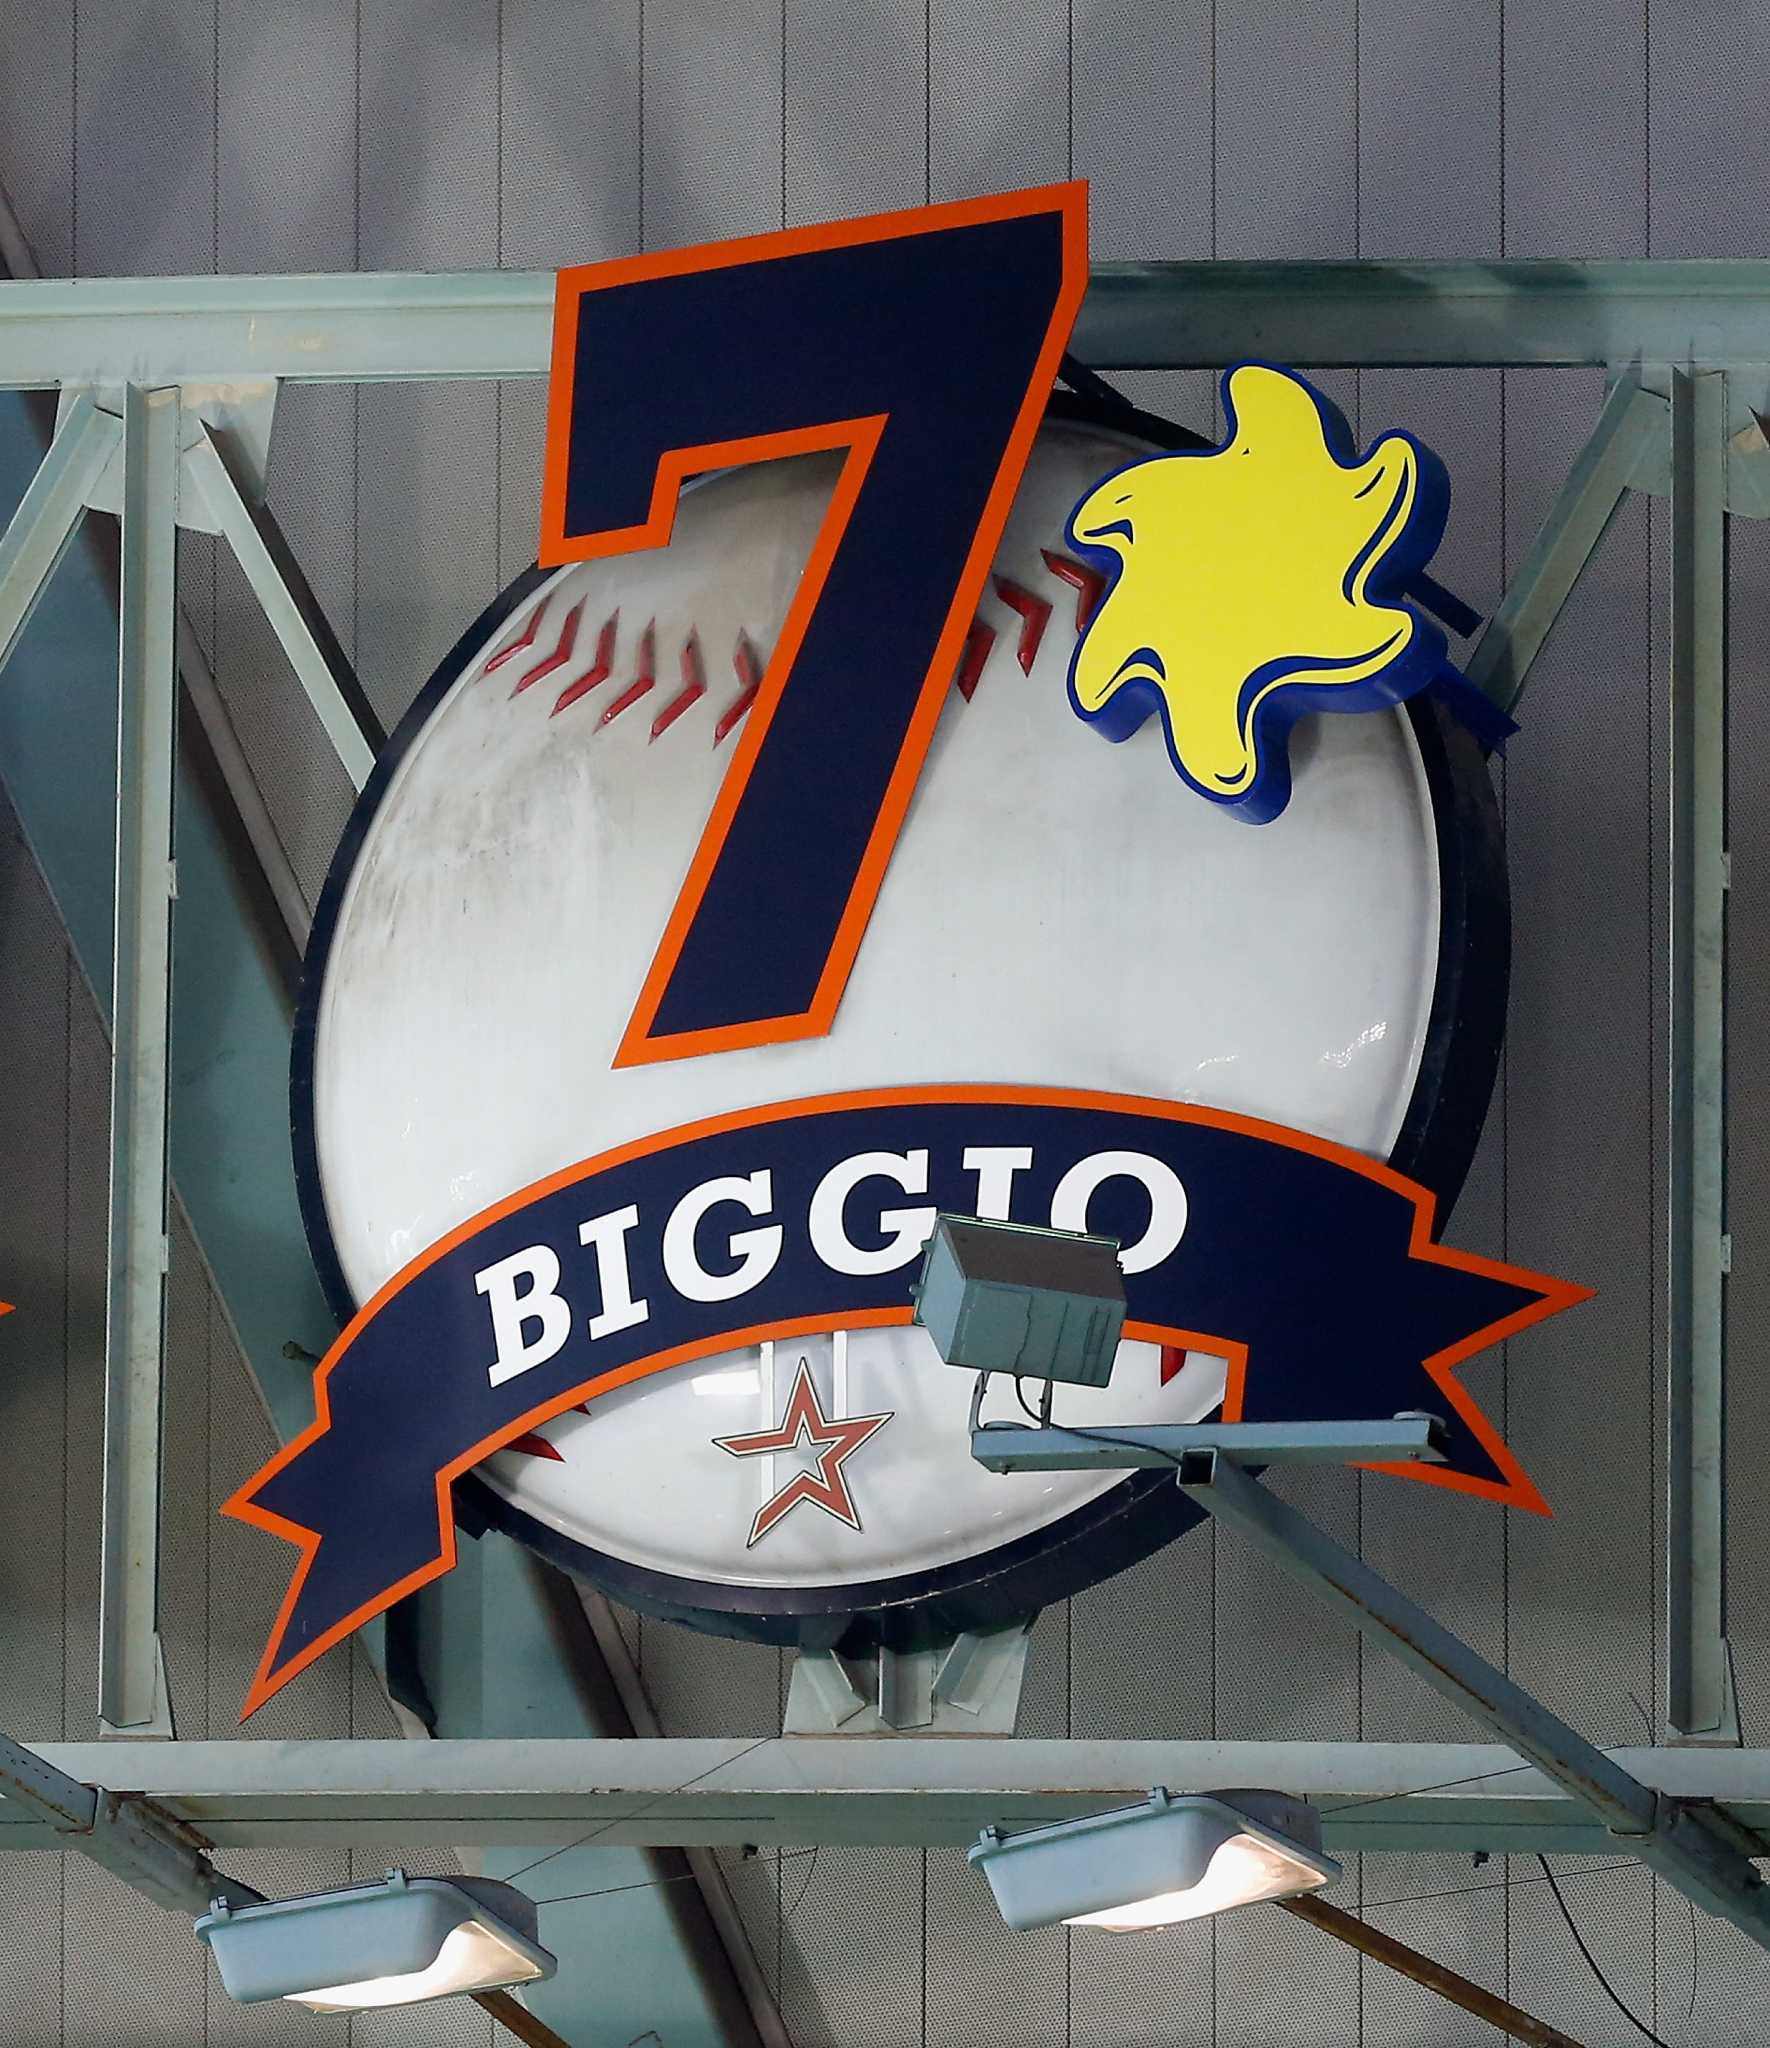 Why Craig Biggio's retired number has a sun